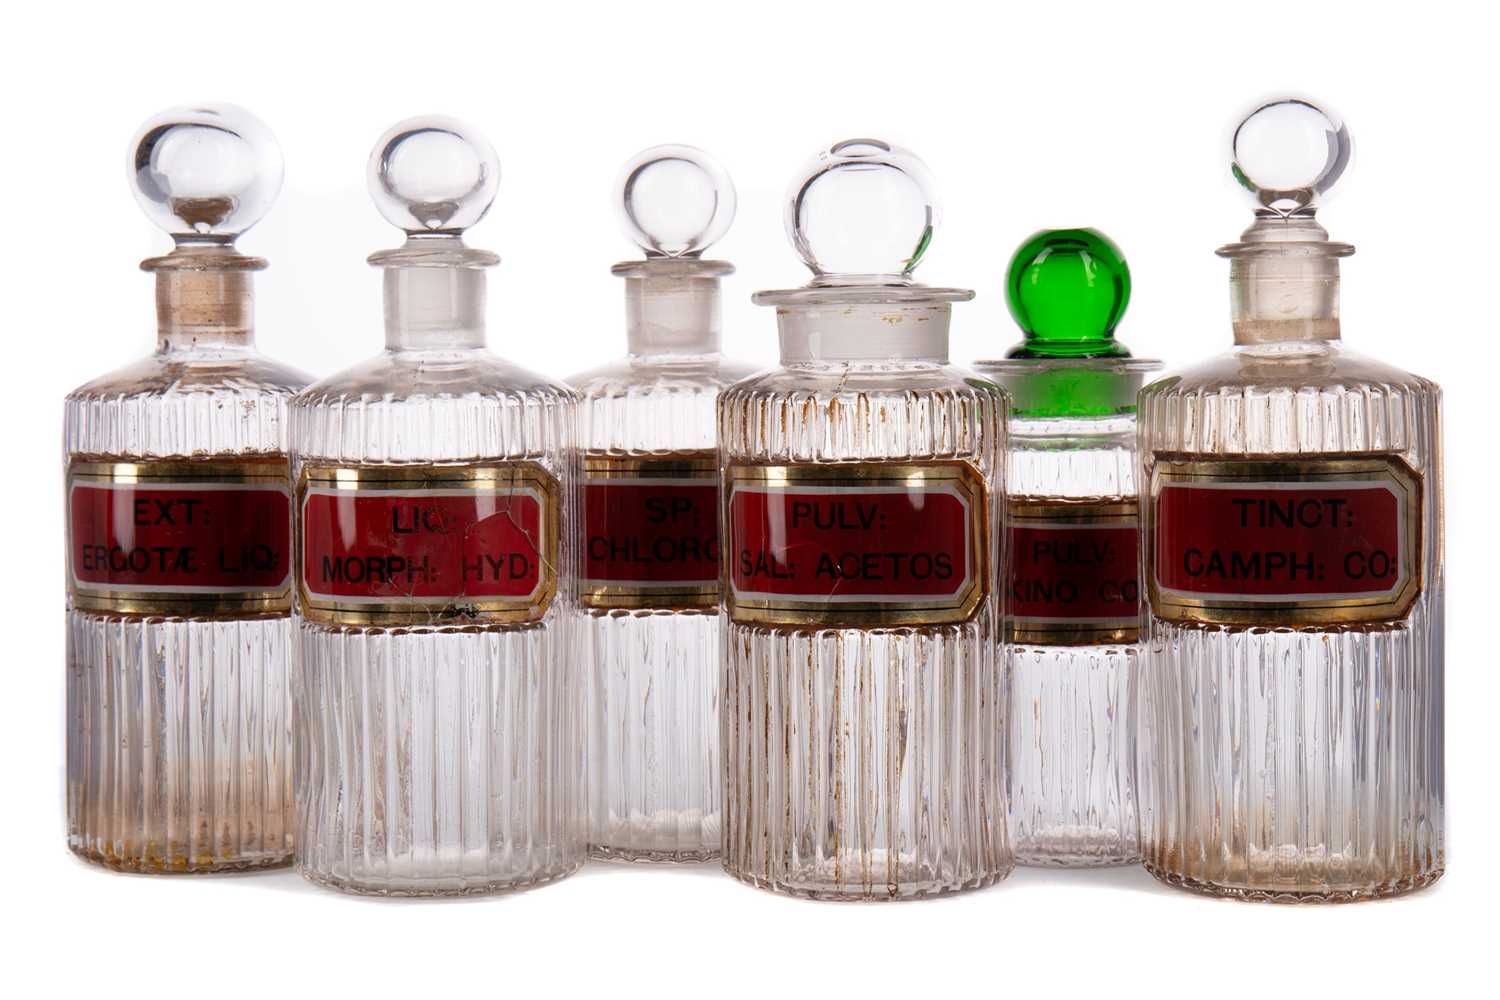 Lot 1144 - TEN LATE 19TH / EARLY 20TH CENTURY PHARMACEUTICAL 'POISON' BOTTLES